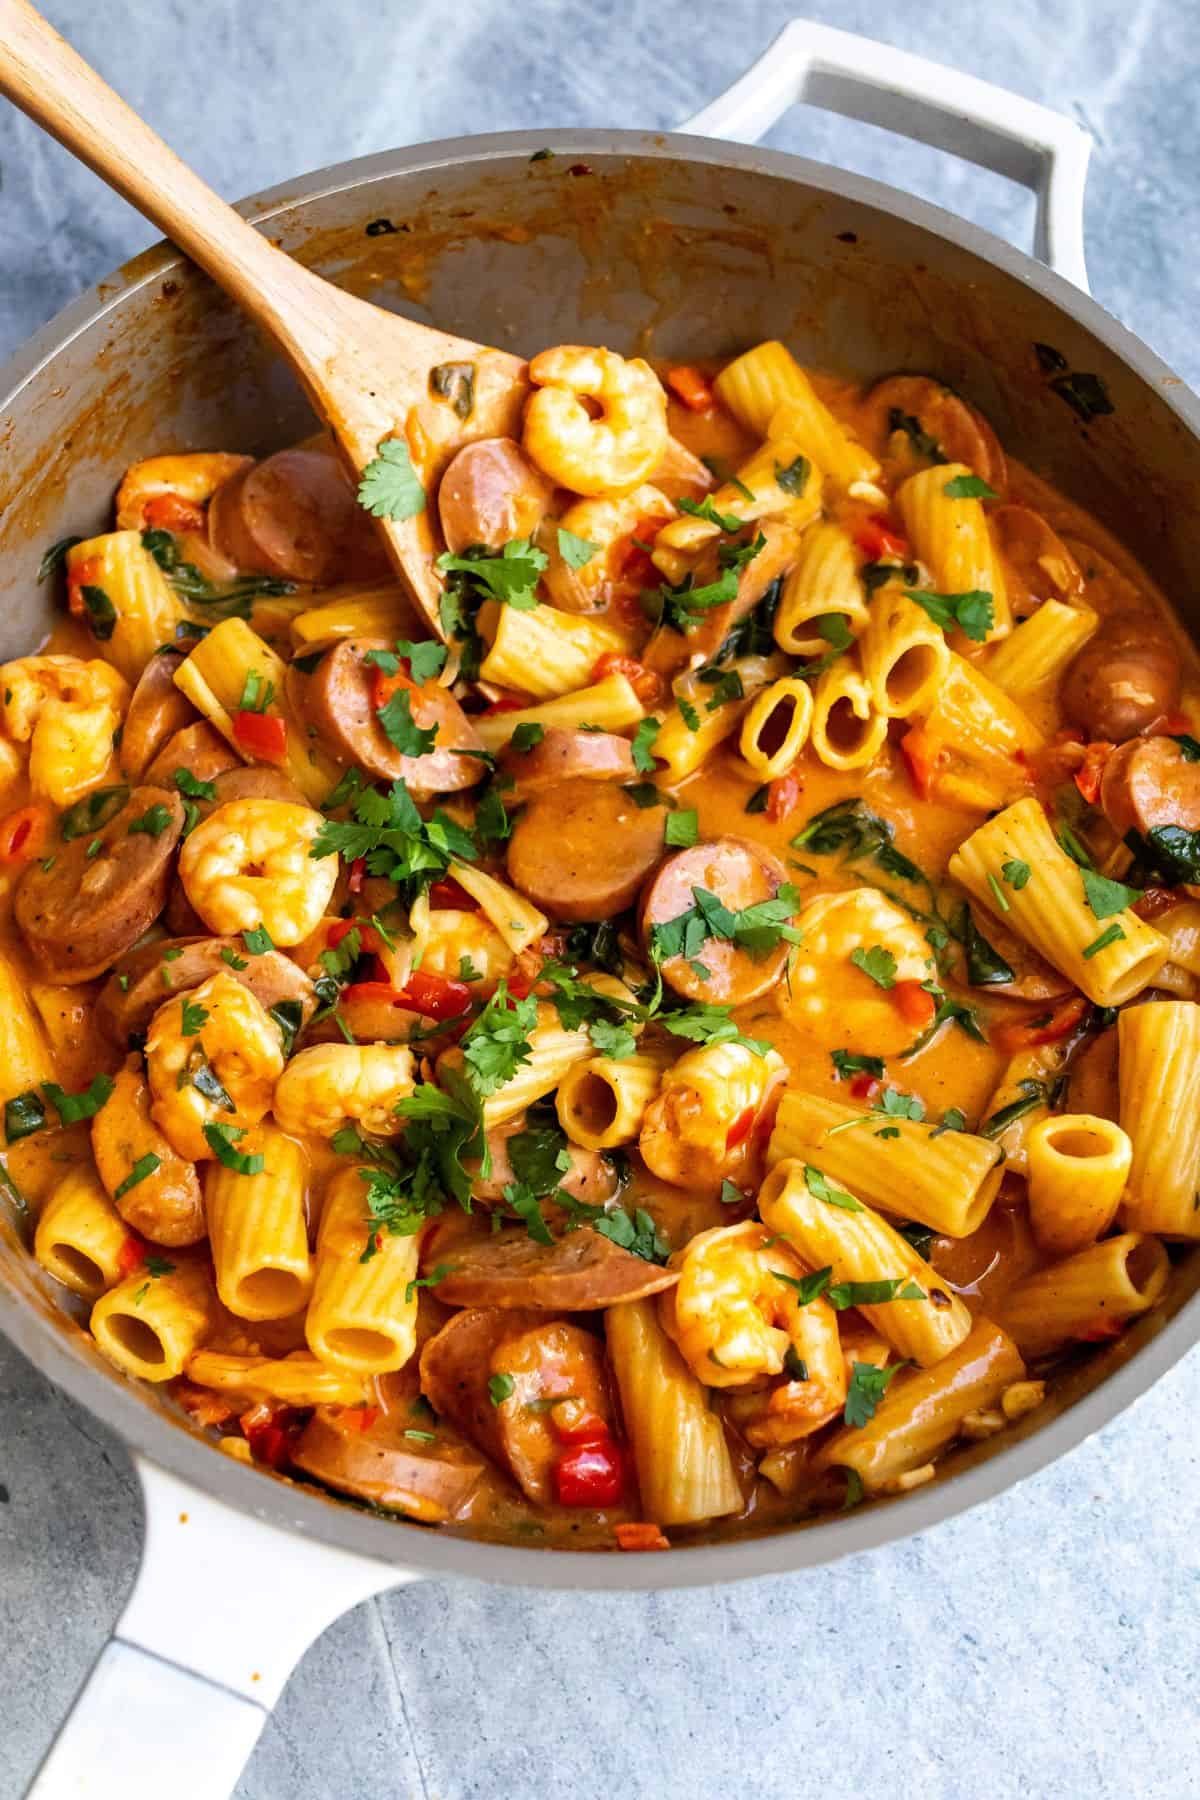 Skillet filled with pasta, sausage and shrimp.